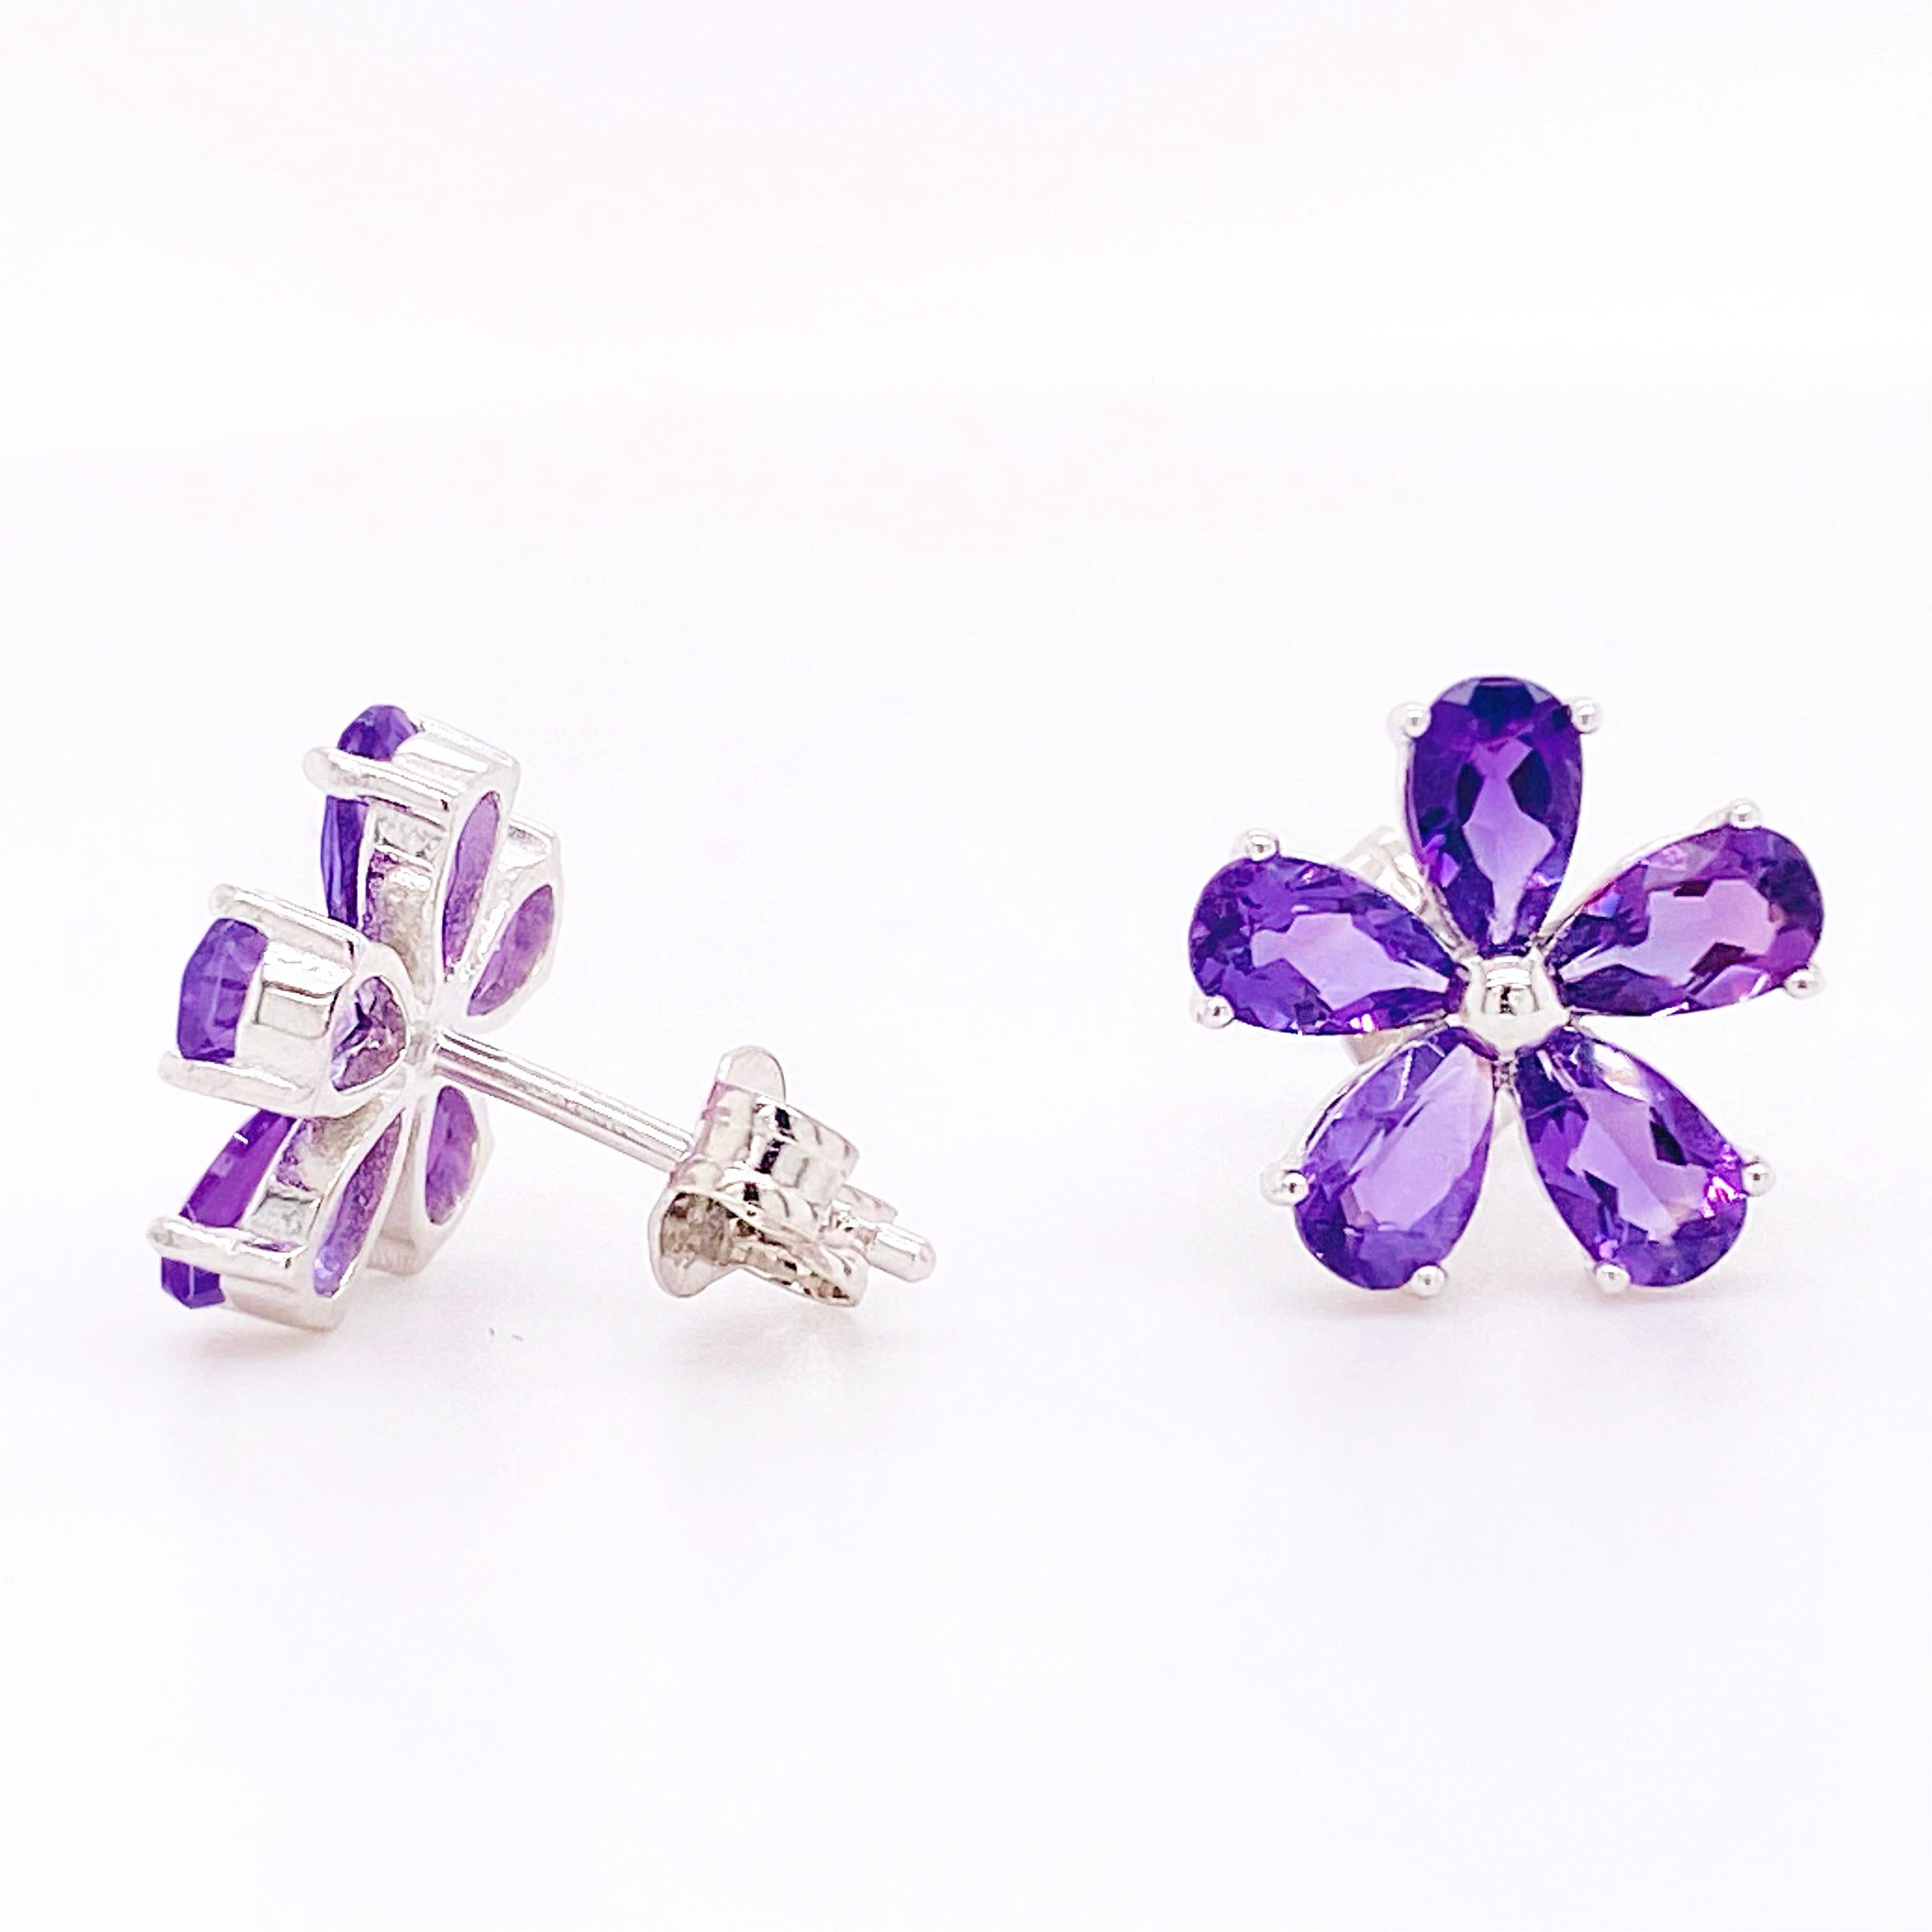 These amethyst flower earrings are perfect for anyone that loves pretty floral designs. The perfectly cut pear shaped amethyst make the five petal flower look beautiful! The details for these gorgeous earrings are listed below:
1 Set
Metal Quality: